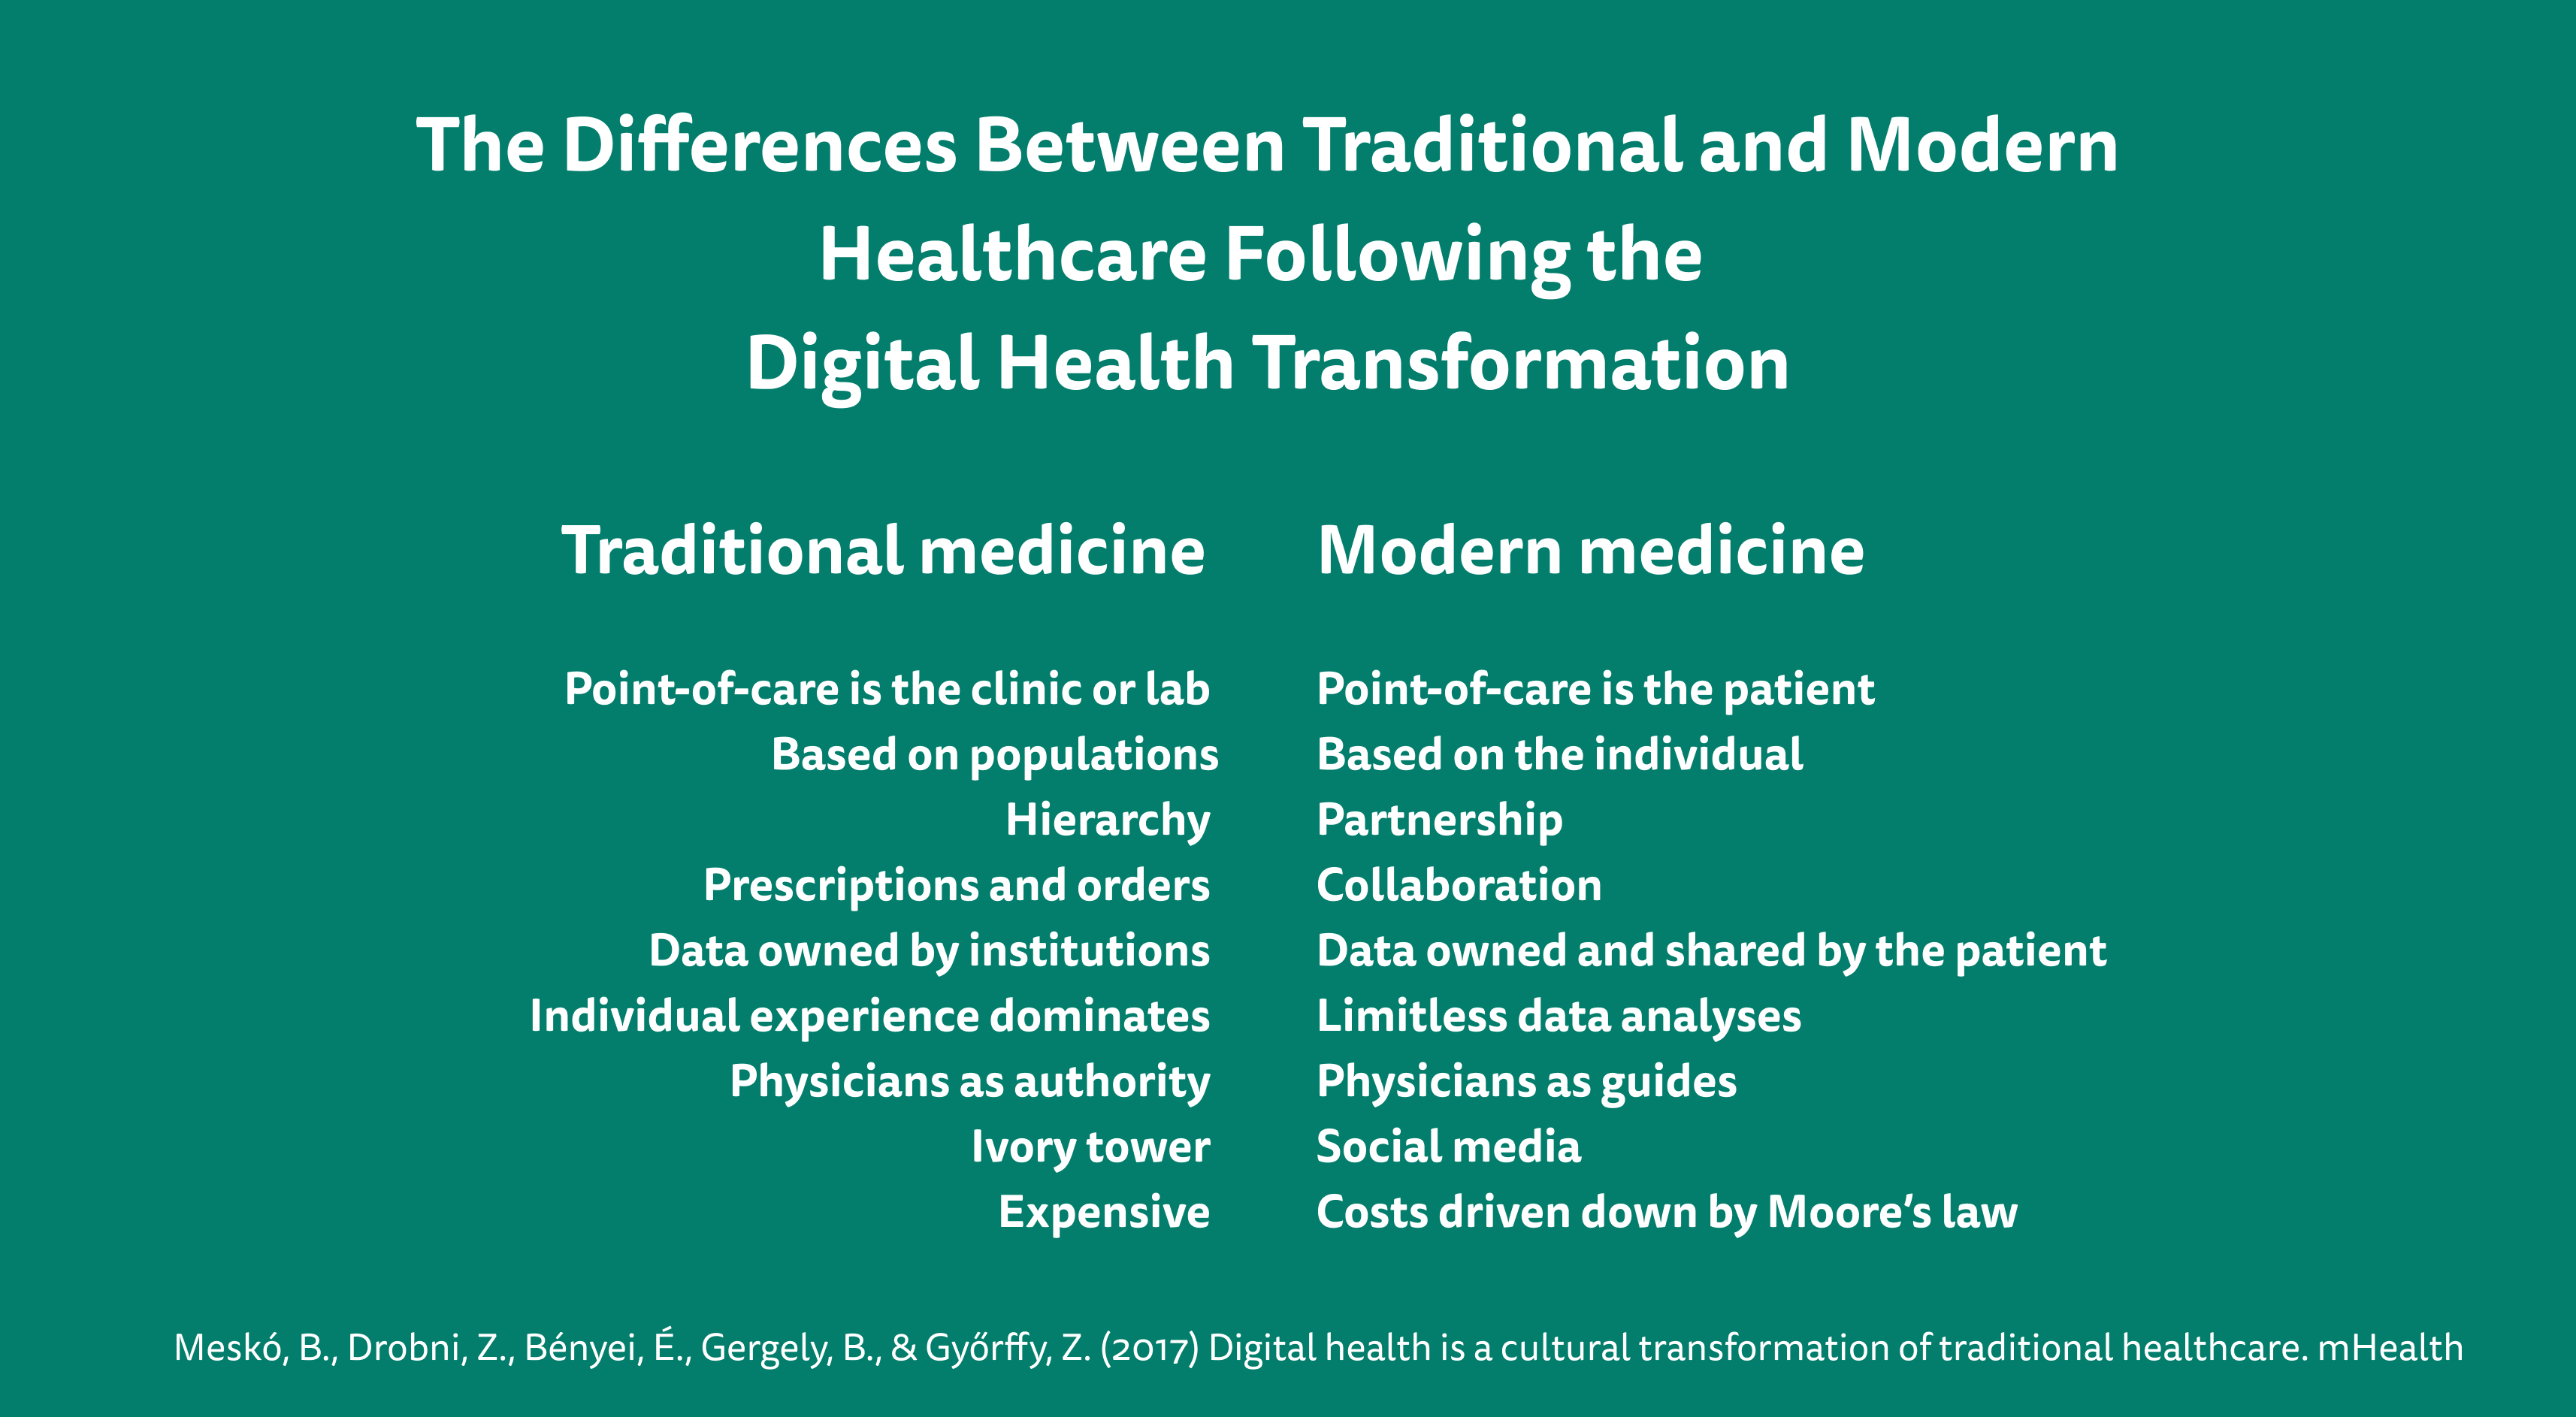 Title image: healthcare innovation in traditional and modern medicine